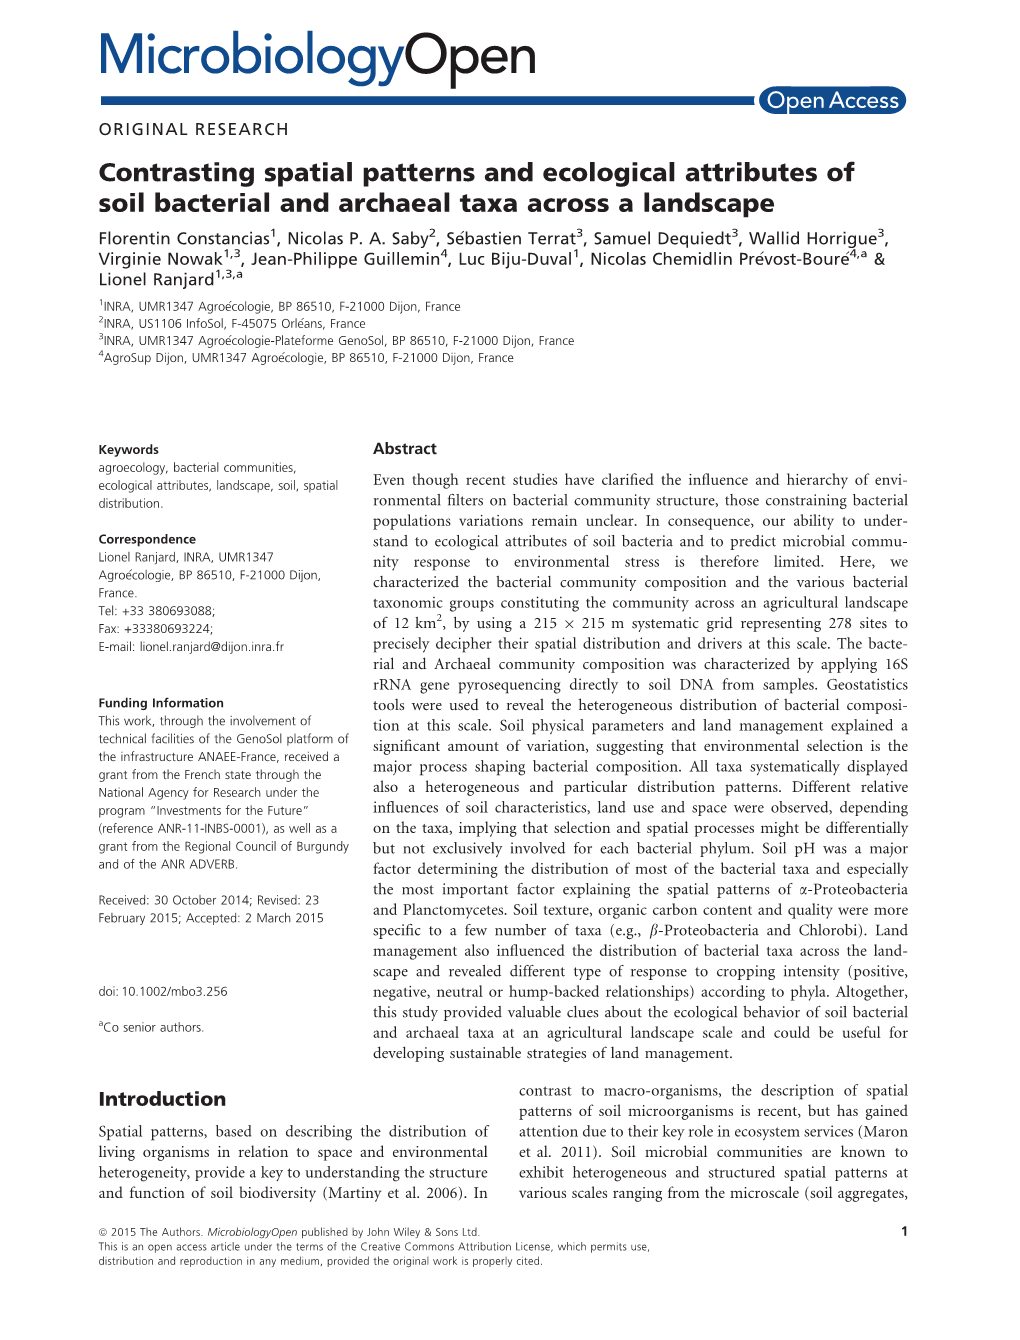 Contrasting Spatial Patterns and Ecological Attributes of Soil Bacterial and Archaeal Taxa Across a Landscape Florentin Constancias1, Nicolas P